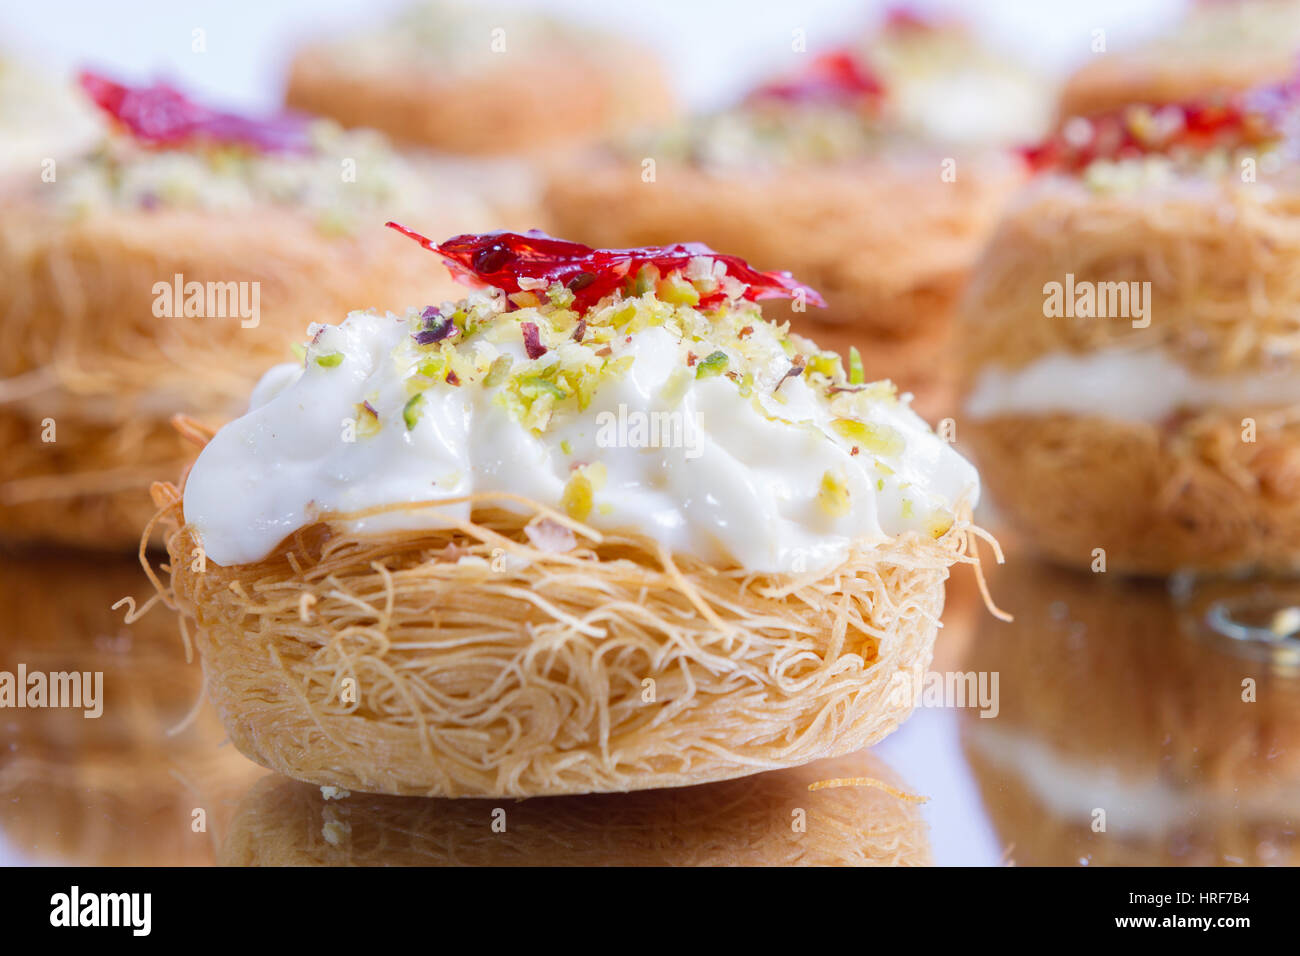 Knafe or Kunafe is a very popular dessert in the levant Lebanon, Syria, Turkey, Jordan. crunchy crust, creamy filling and orange flower jam on the top. Stock Photo